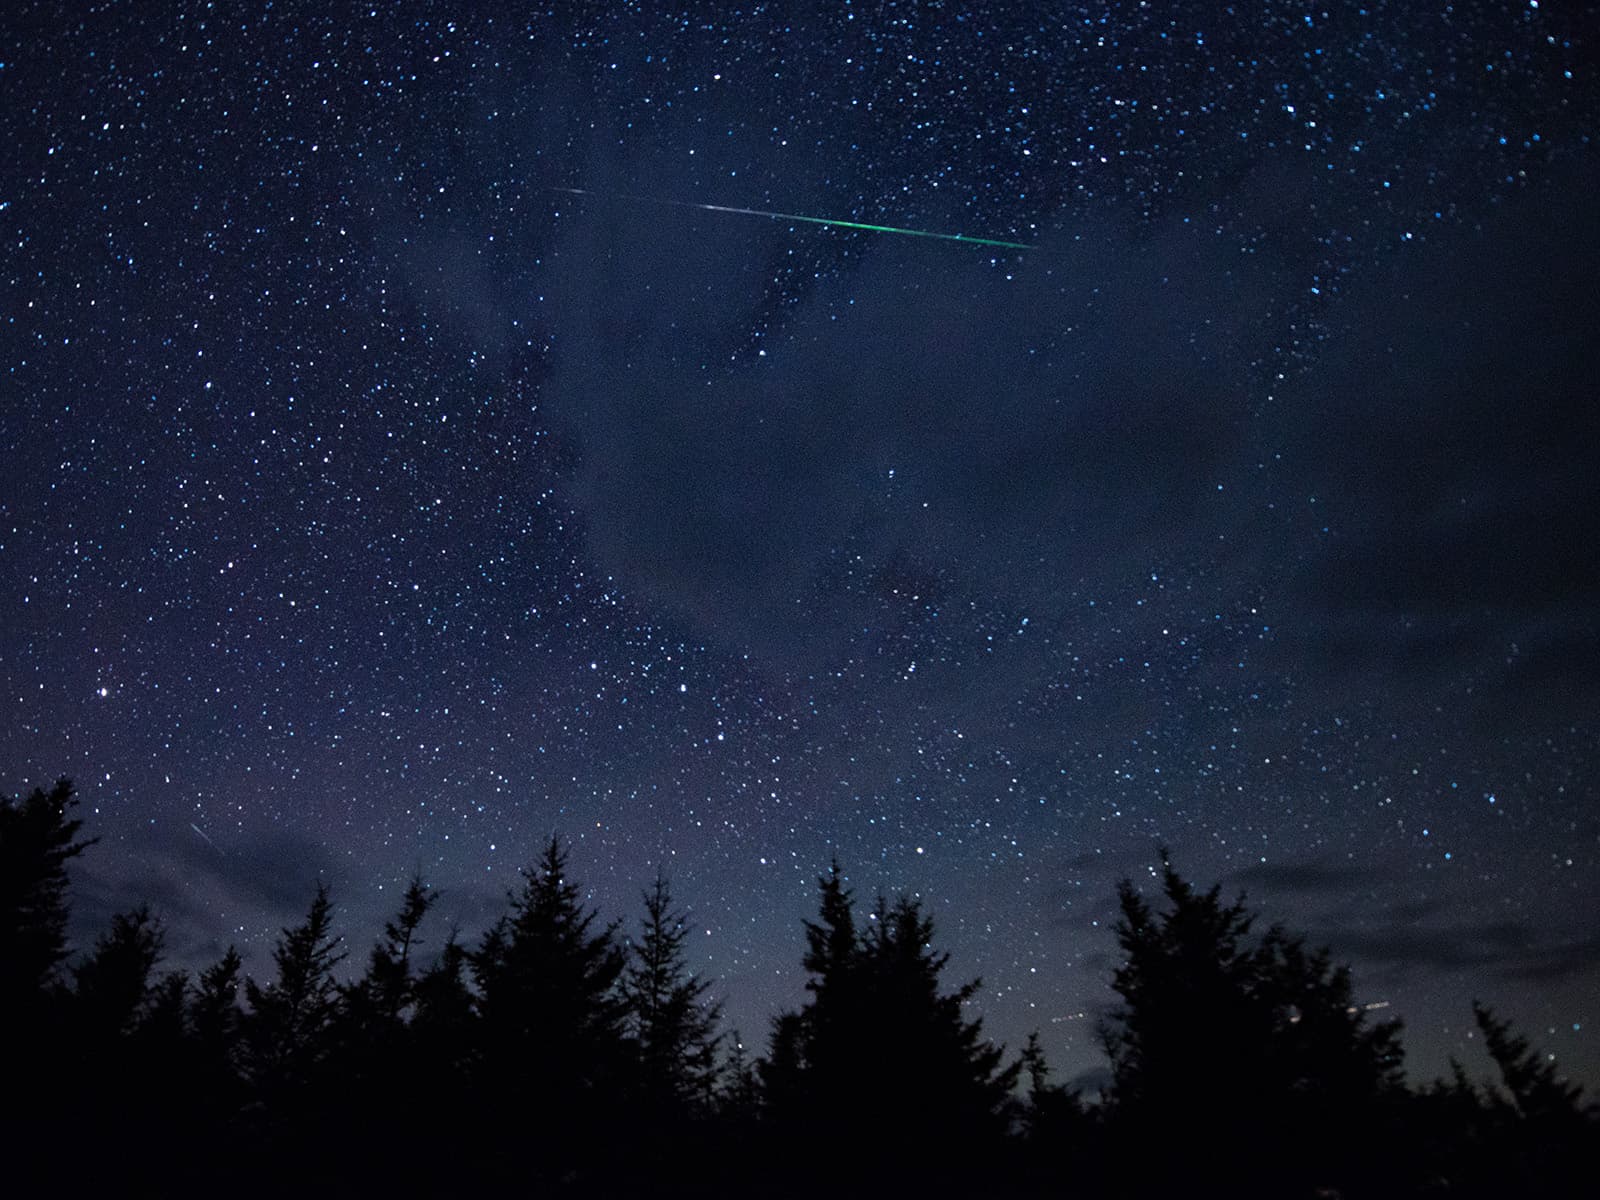 view of the perseid meteor shower in the night sky